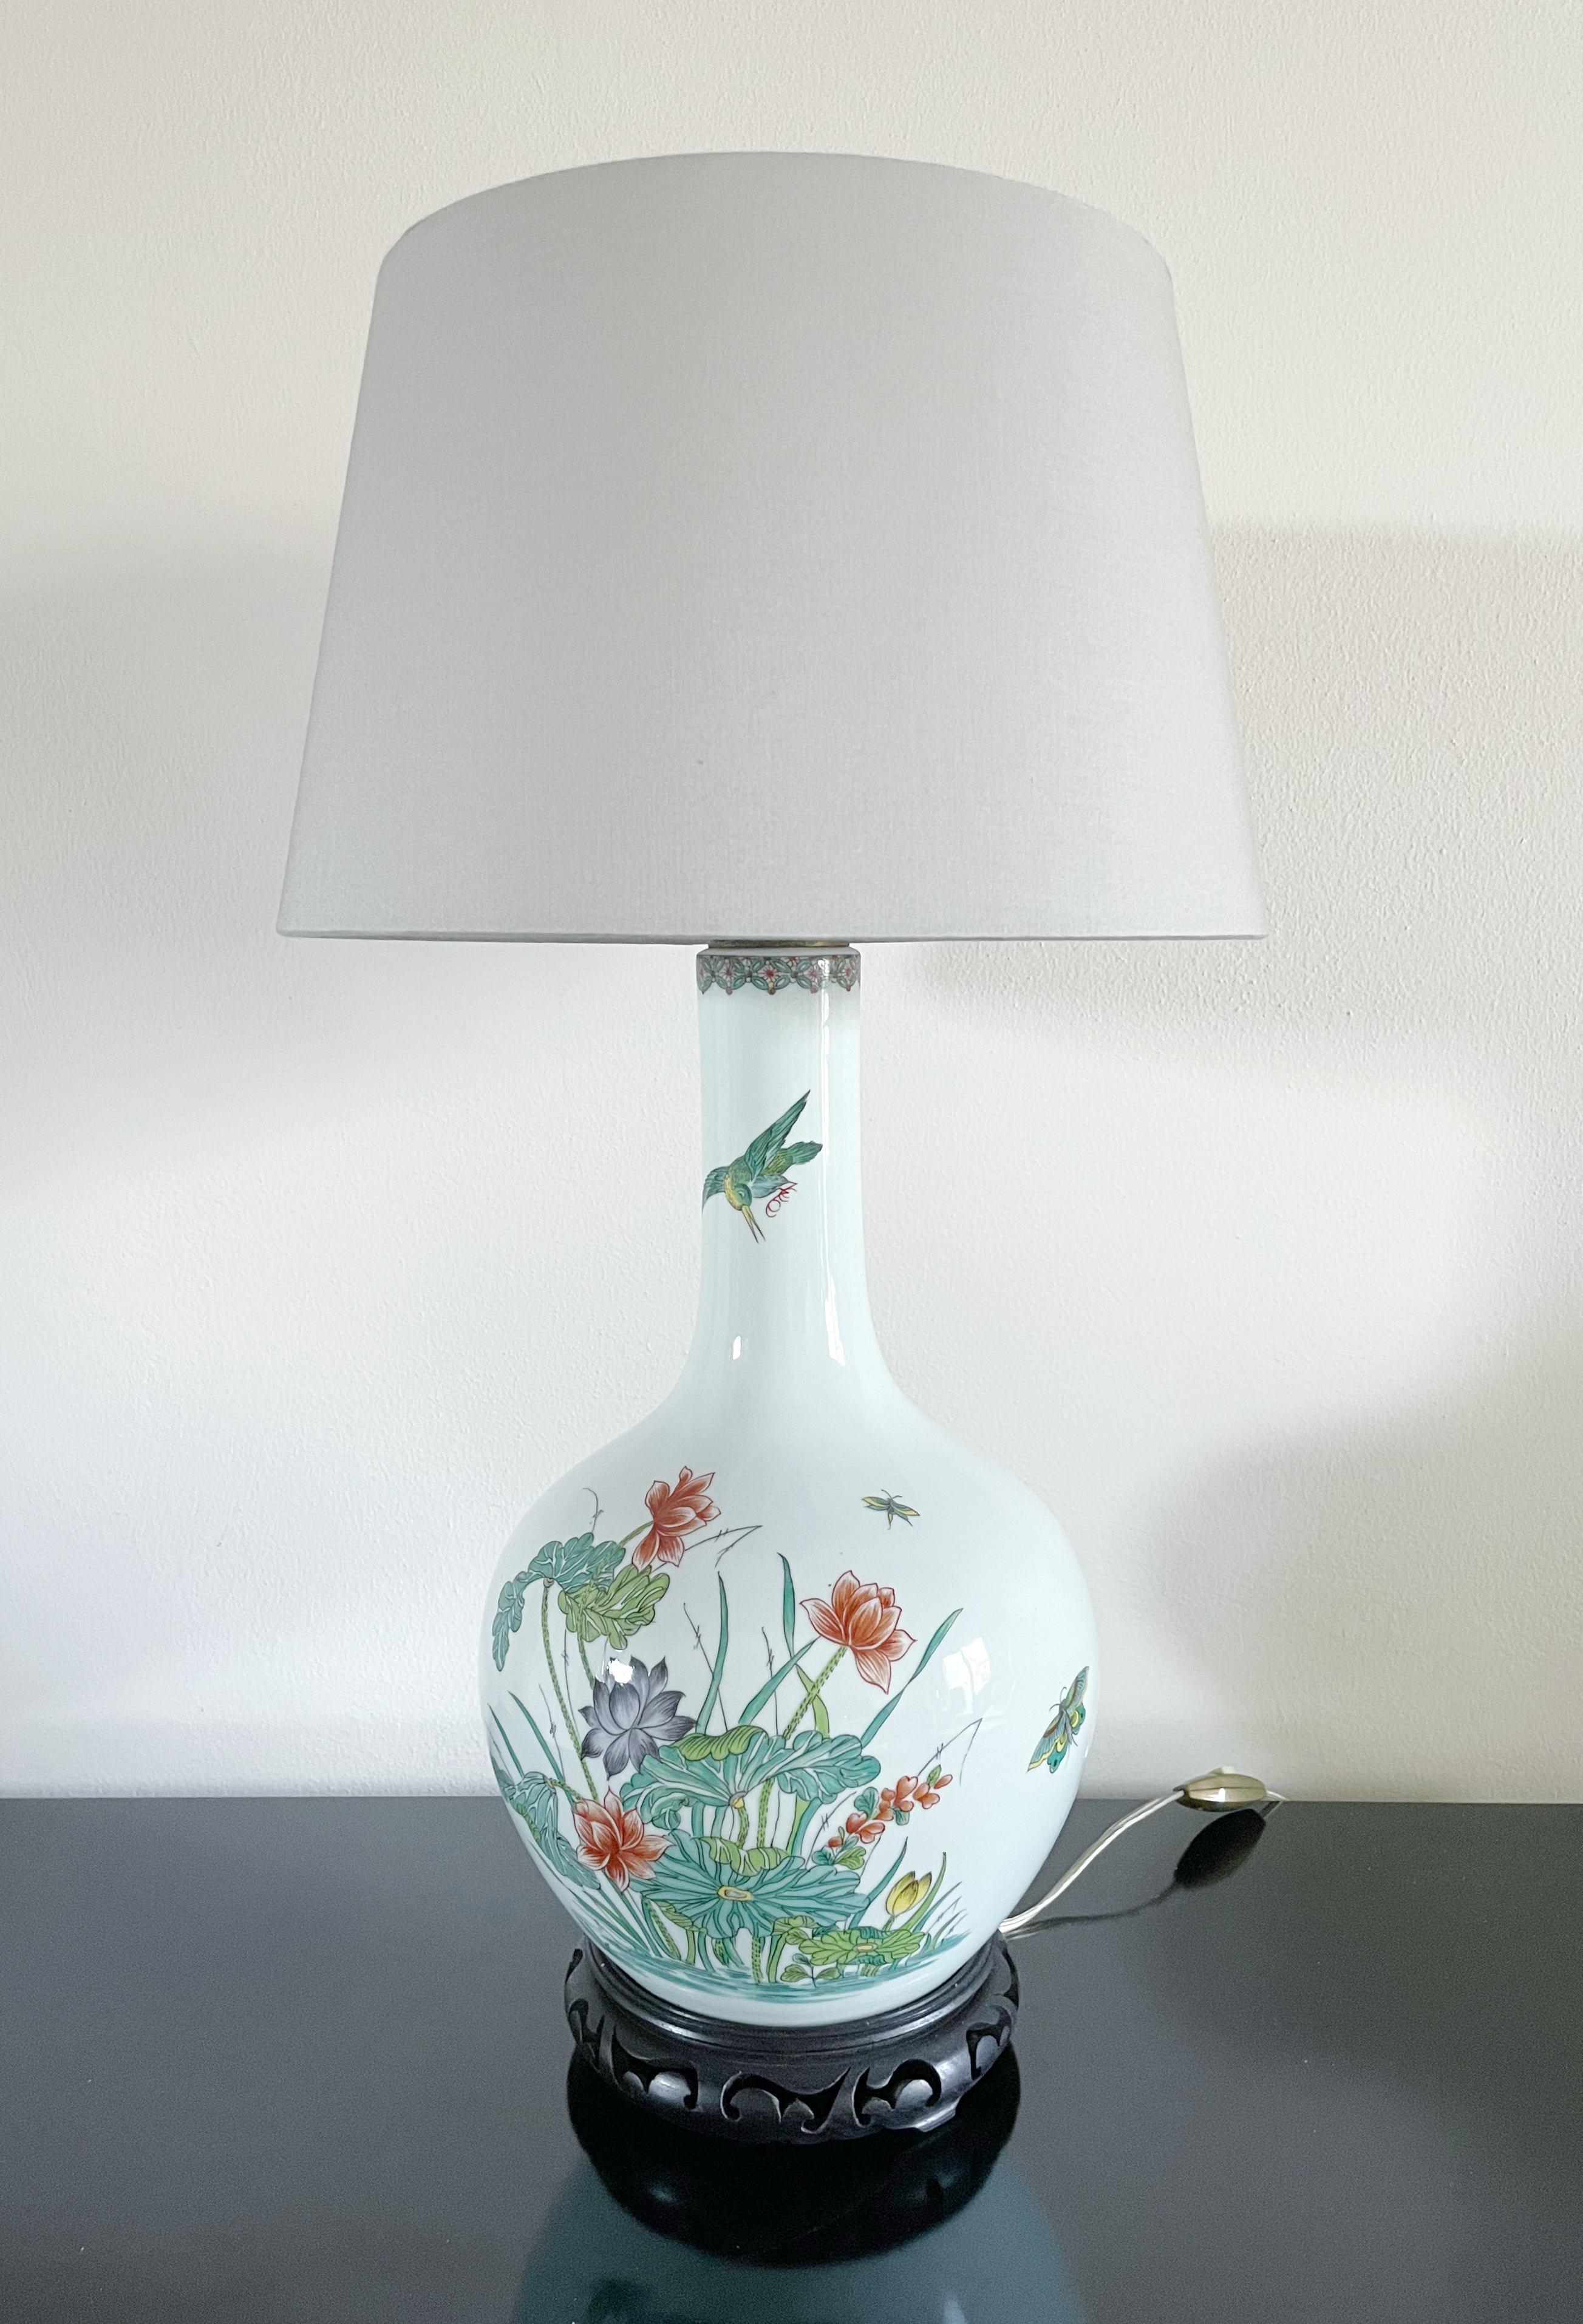 Japanese hand-painted porcelain lamp with lotus motif mounted on black wood base
Dimensions including lamp shade: height 24.5 inches, diameter 17 inches
Dimensions without lamp shade: height 18 inches, diameter 8.5 inches
1 available in stock in